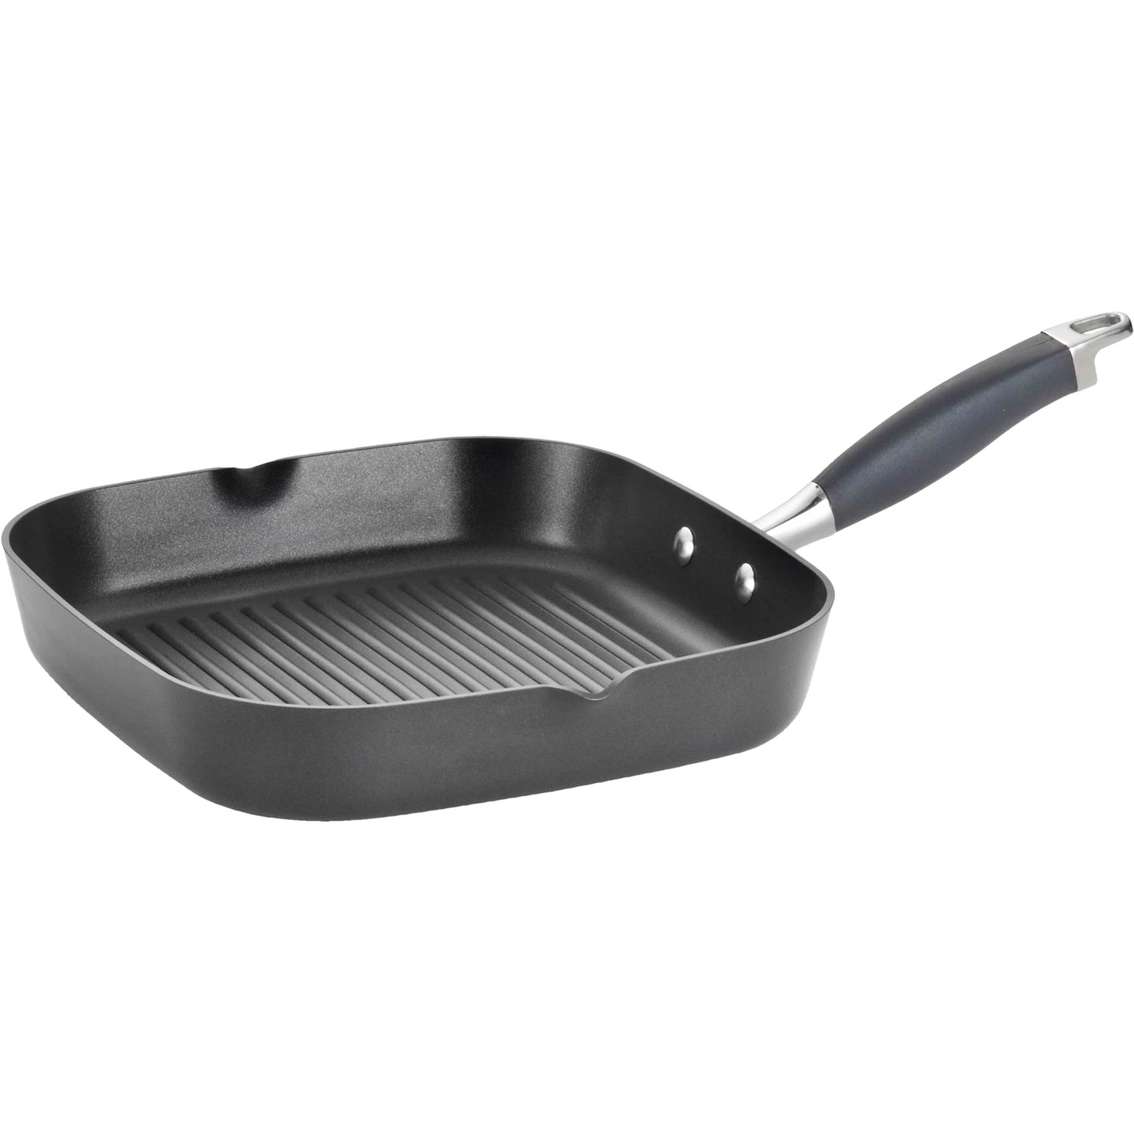 Cooks Standard Hard Anodized Nonstick Square Grill Pan 11 x 11-inch Black